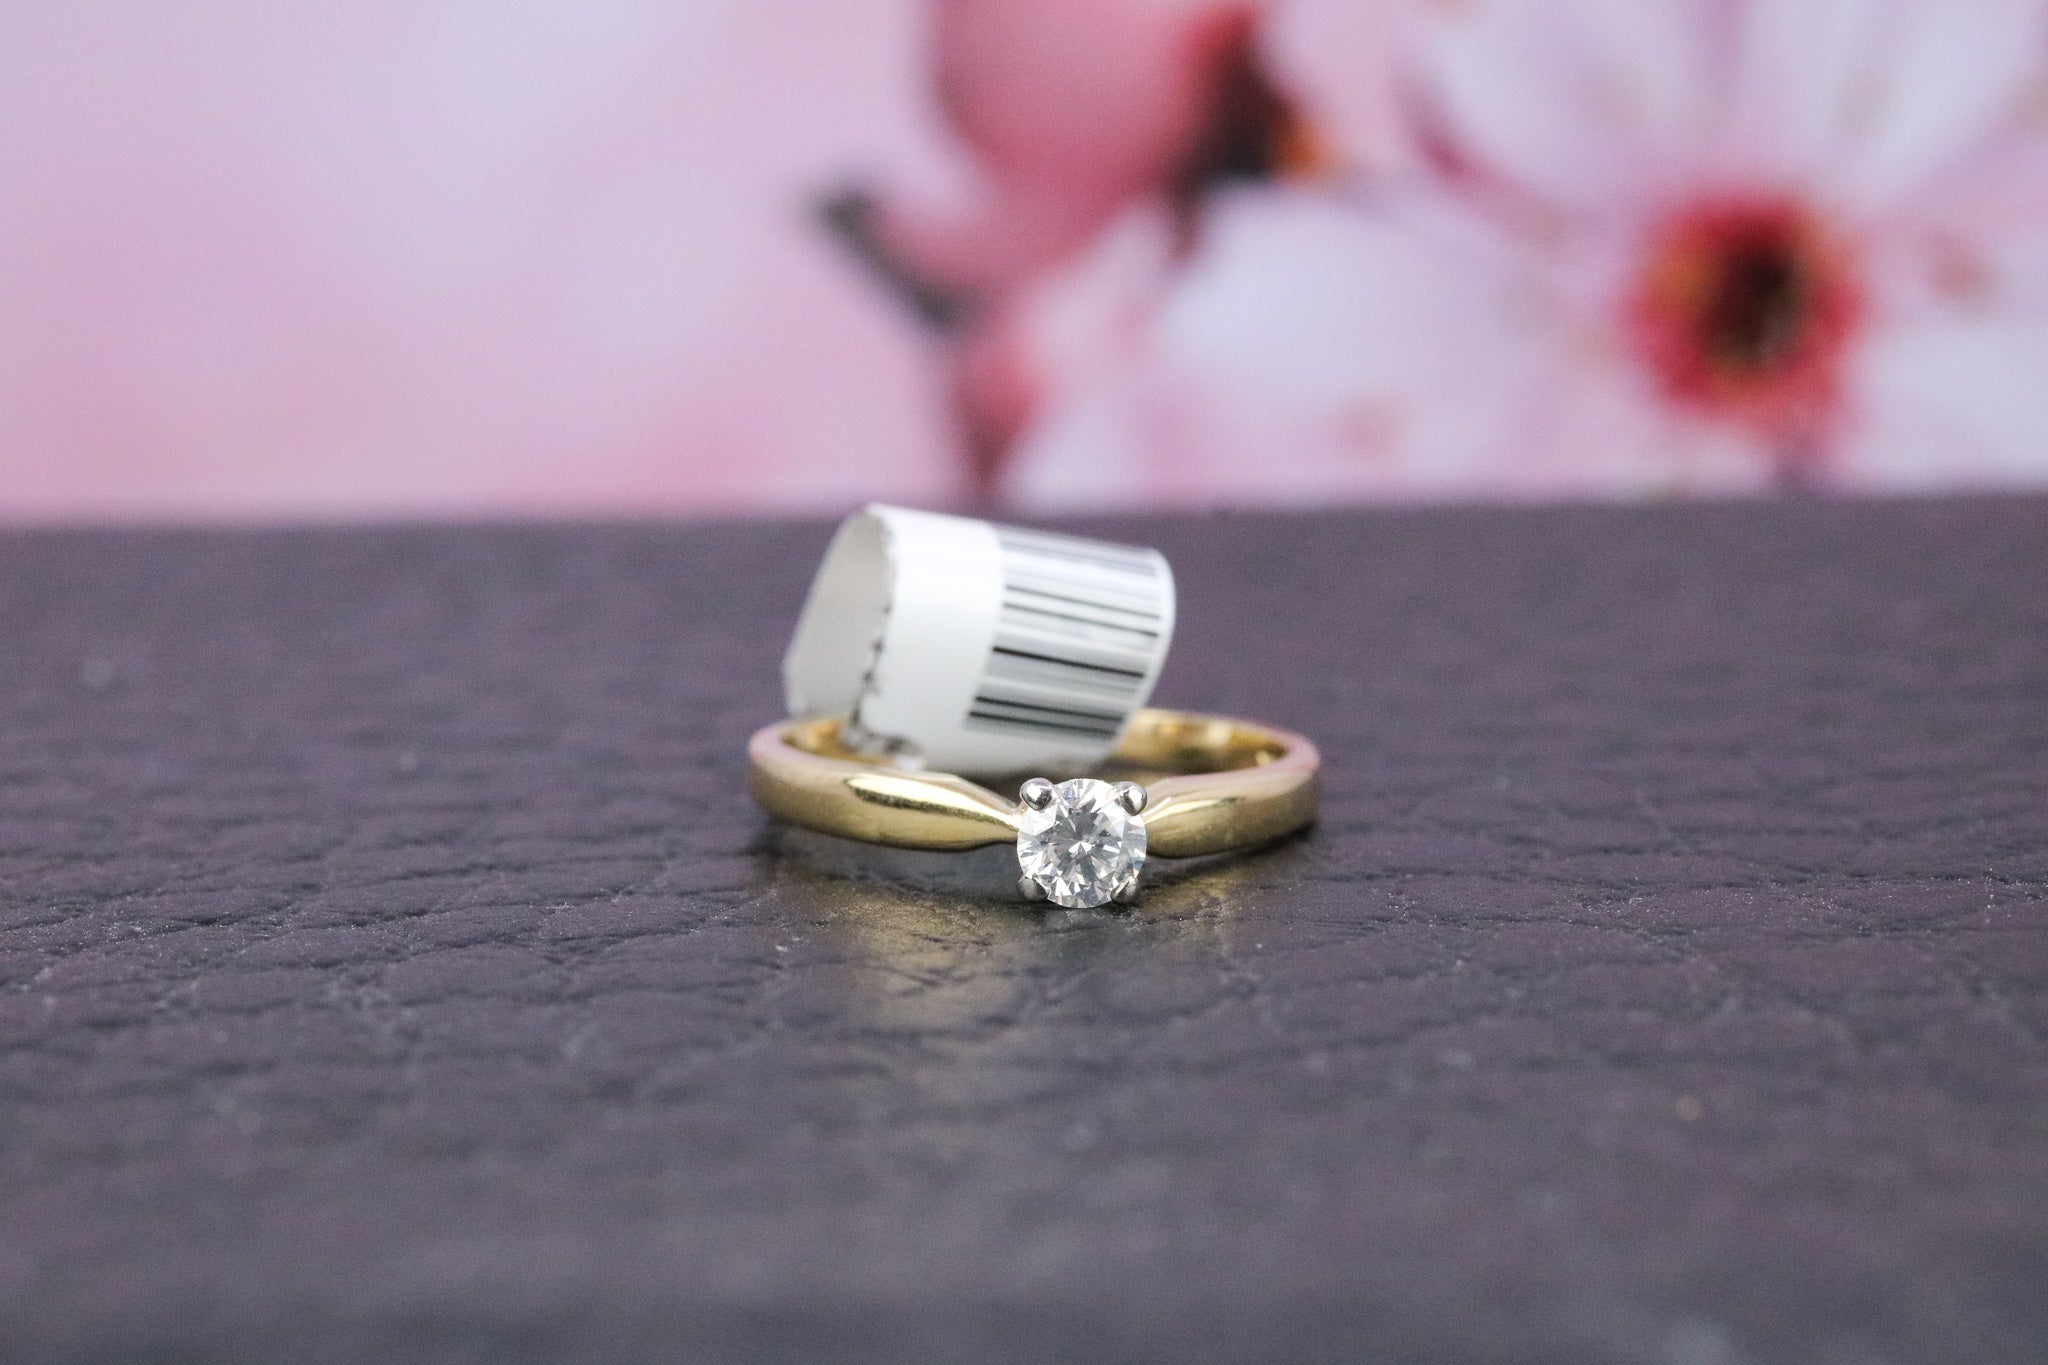 18ct Yellow Gold Diamond Ring - HJ2018 - Hallmark Jewellers Formby & The Jewellers Bench Widnes